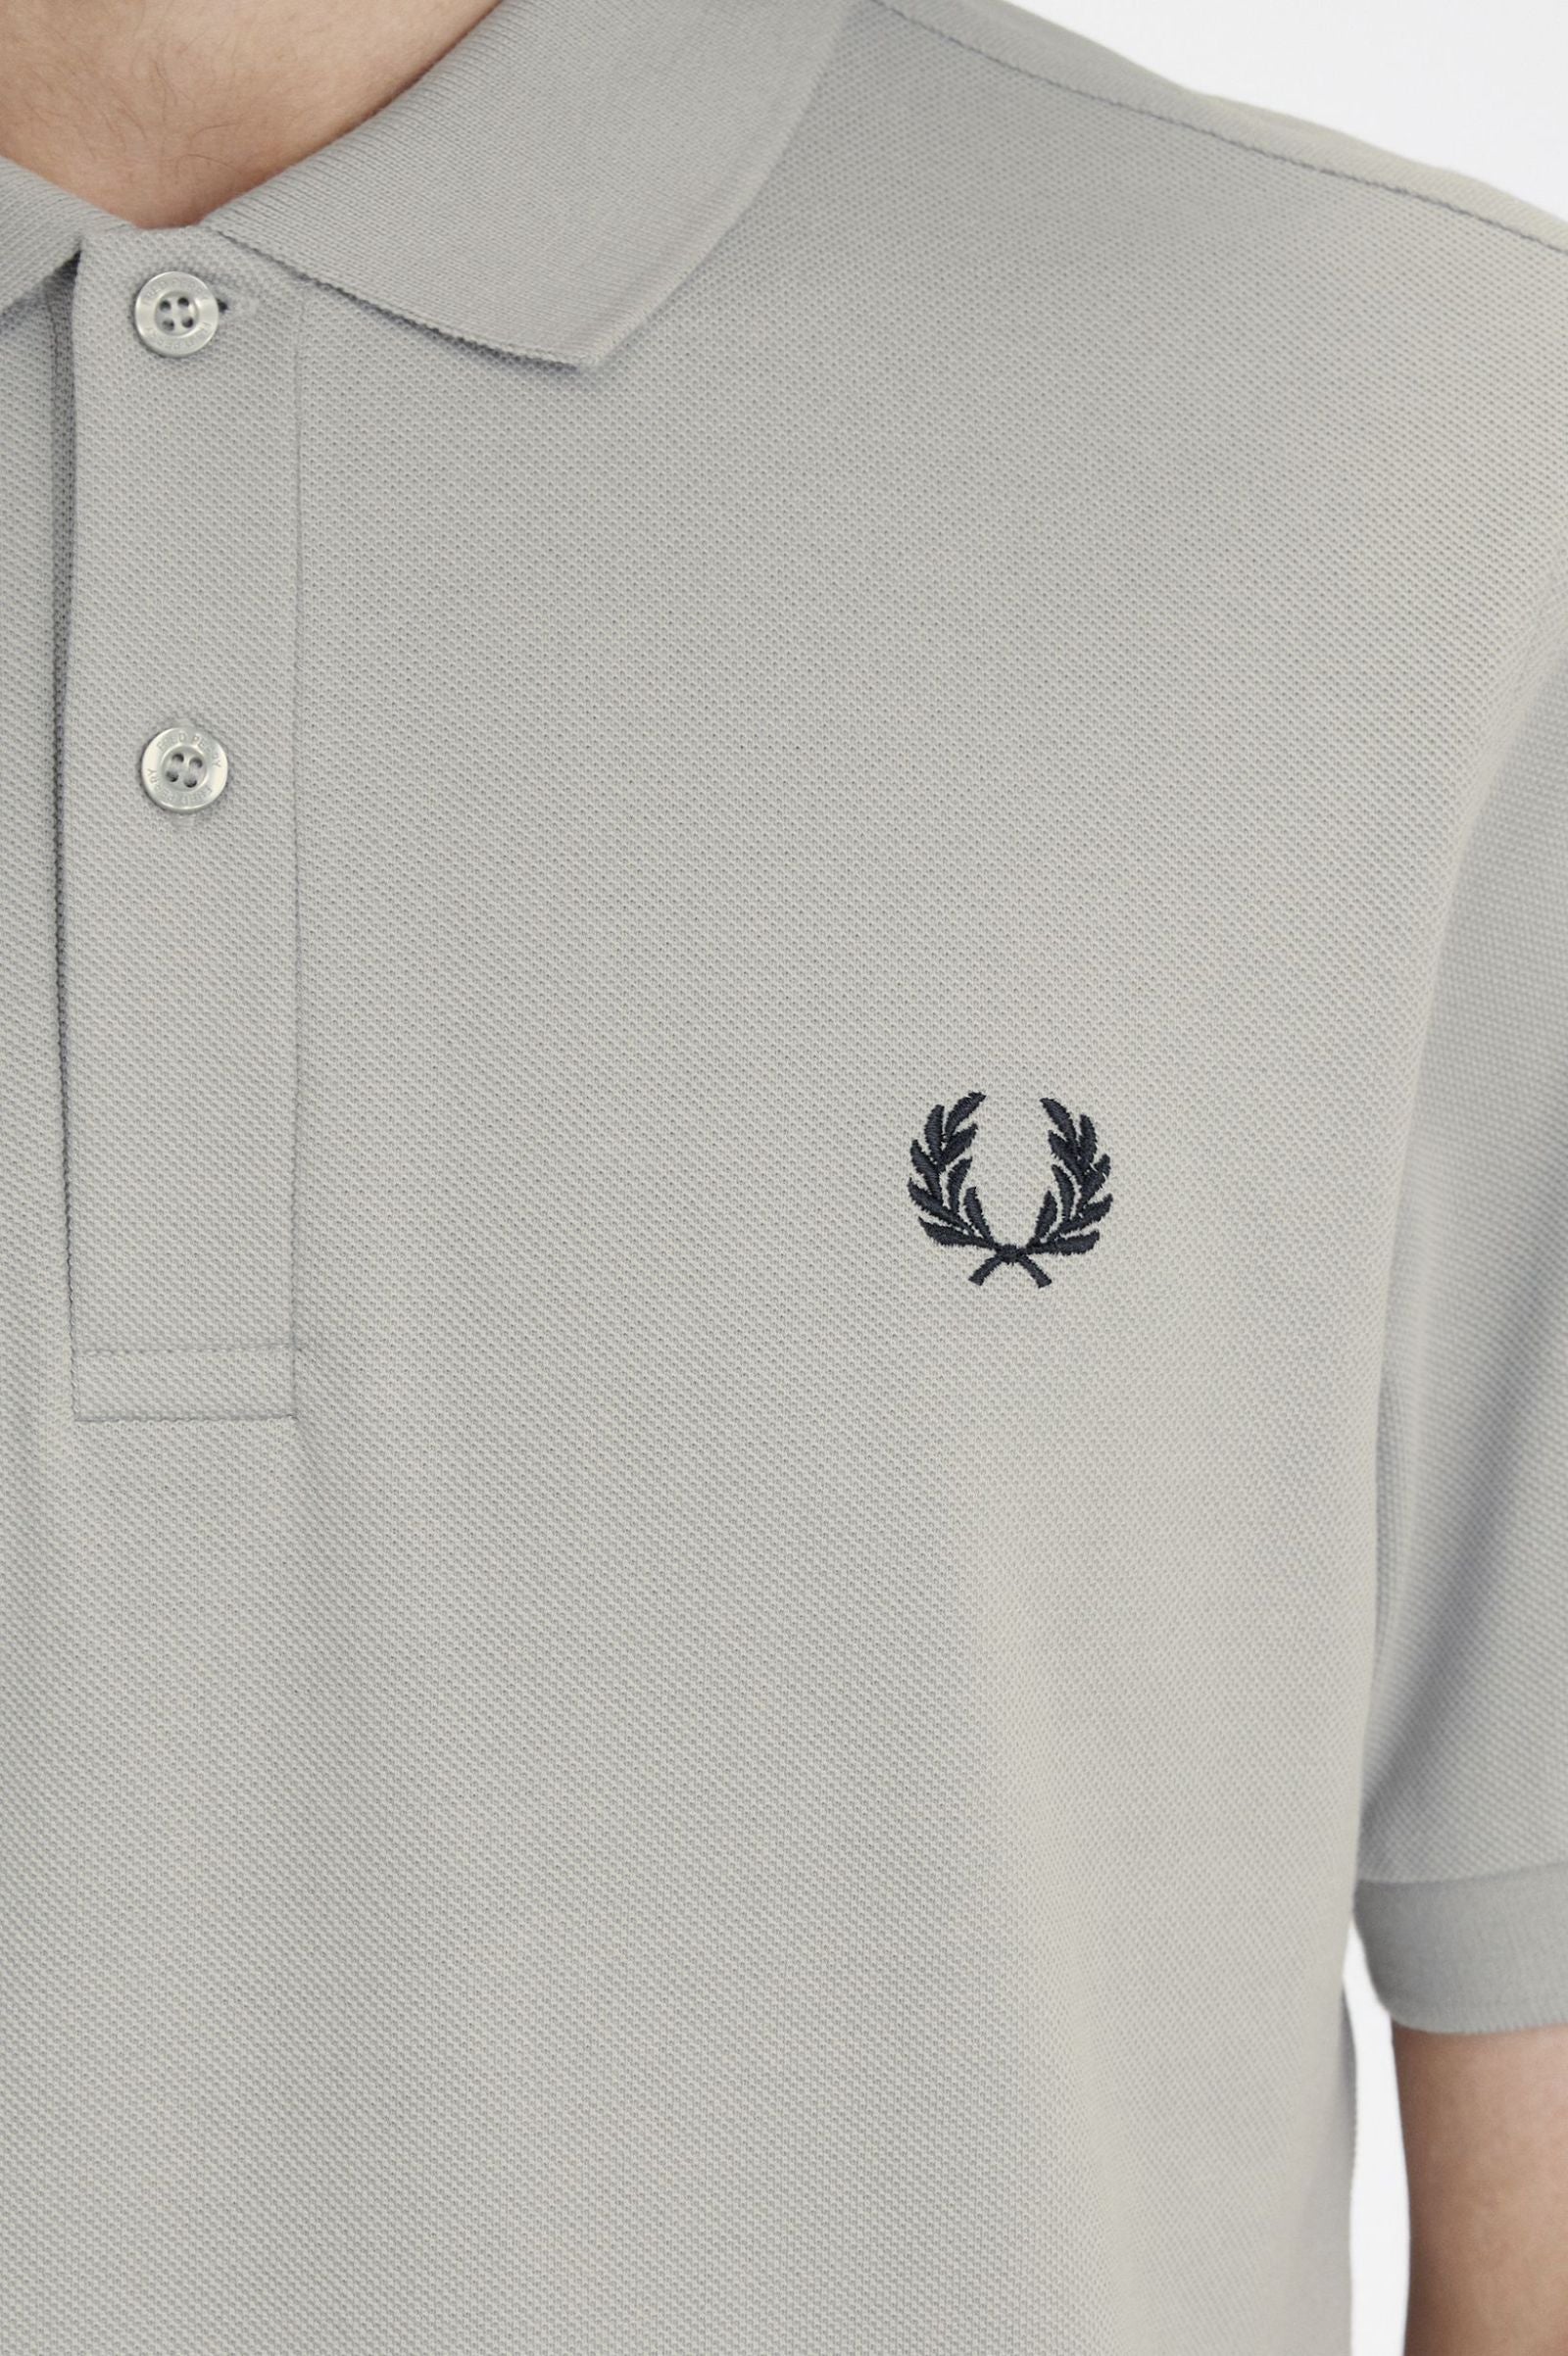 Fred Perry Polo M6000 color caliza y negro hombre